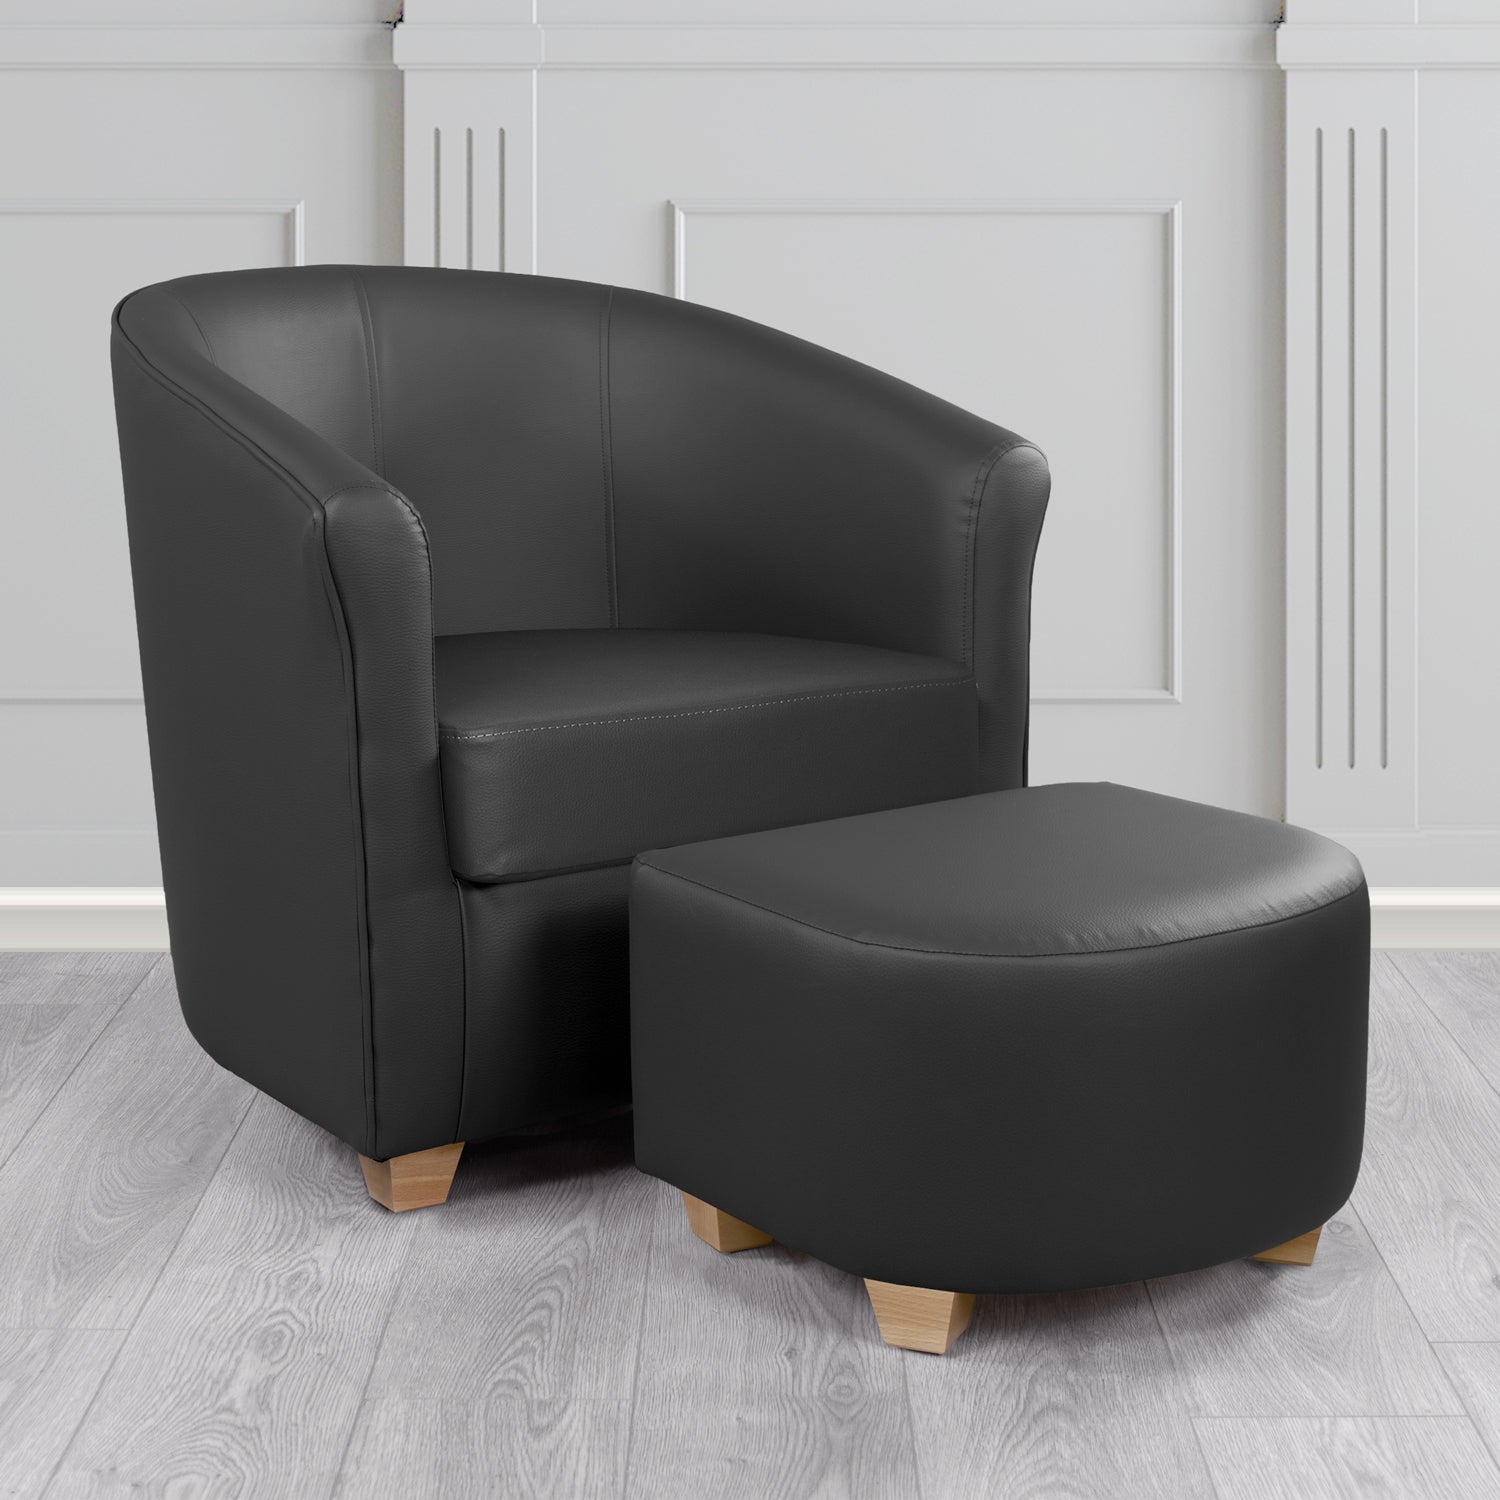 Cannes Tub Chair with Footstool Set in Madrid Black Faux Leather - The Tub Chair Shop